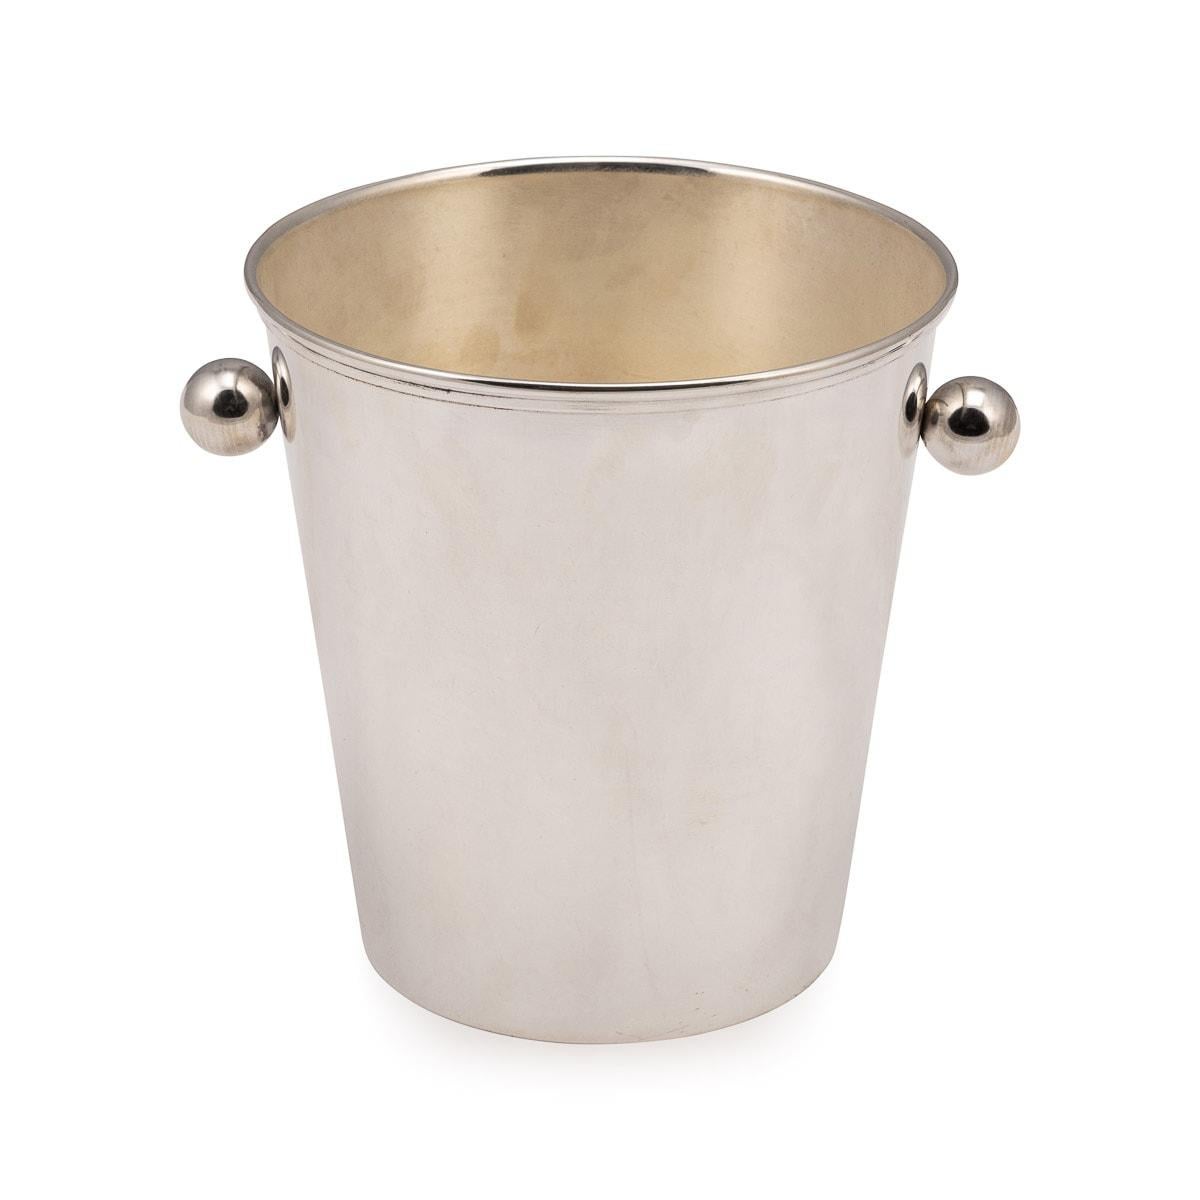 British 20th Century Silver Plated Wine Cooler By Mappin & Webb, England, c.1940s For Sale